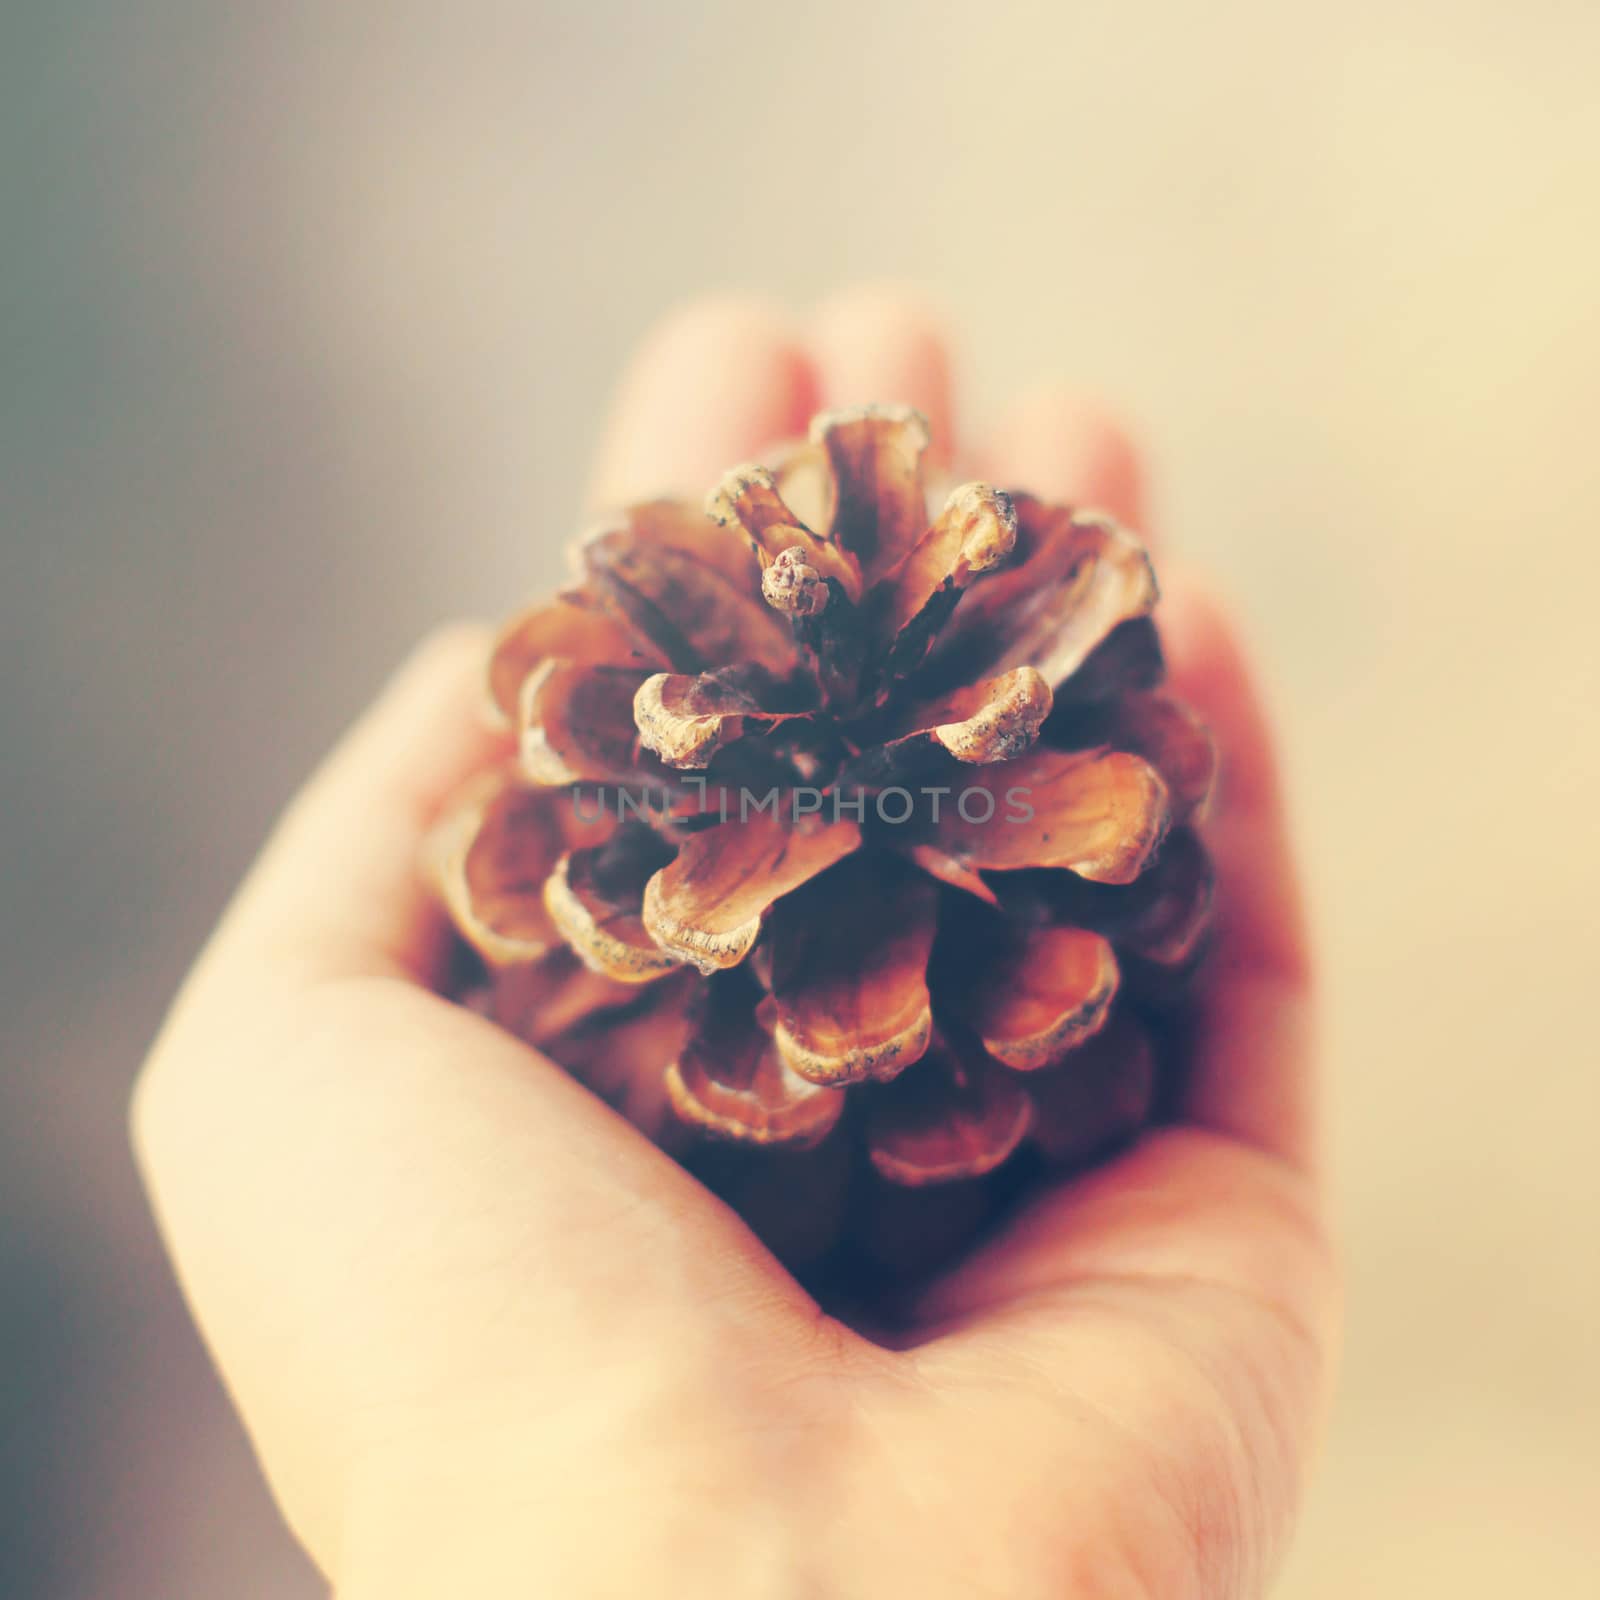 Hand holding pine cone with retro filter effect by nuchylee